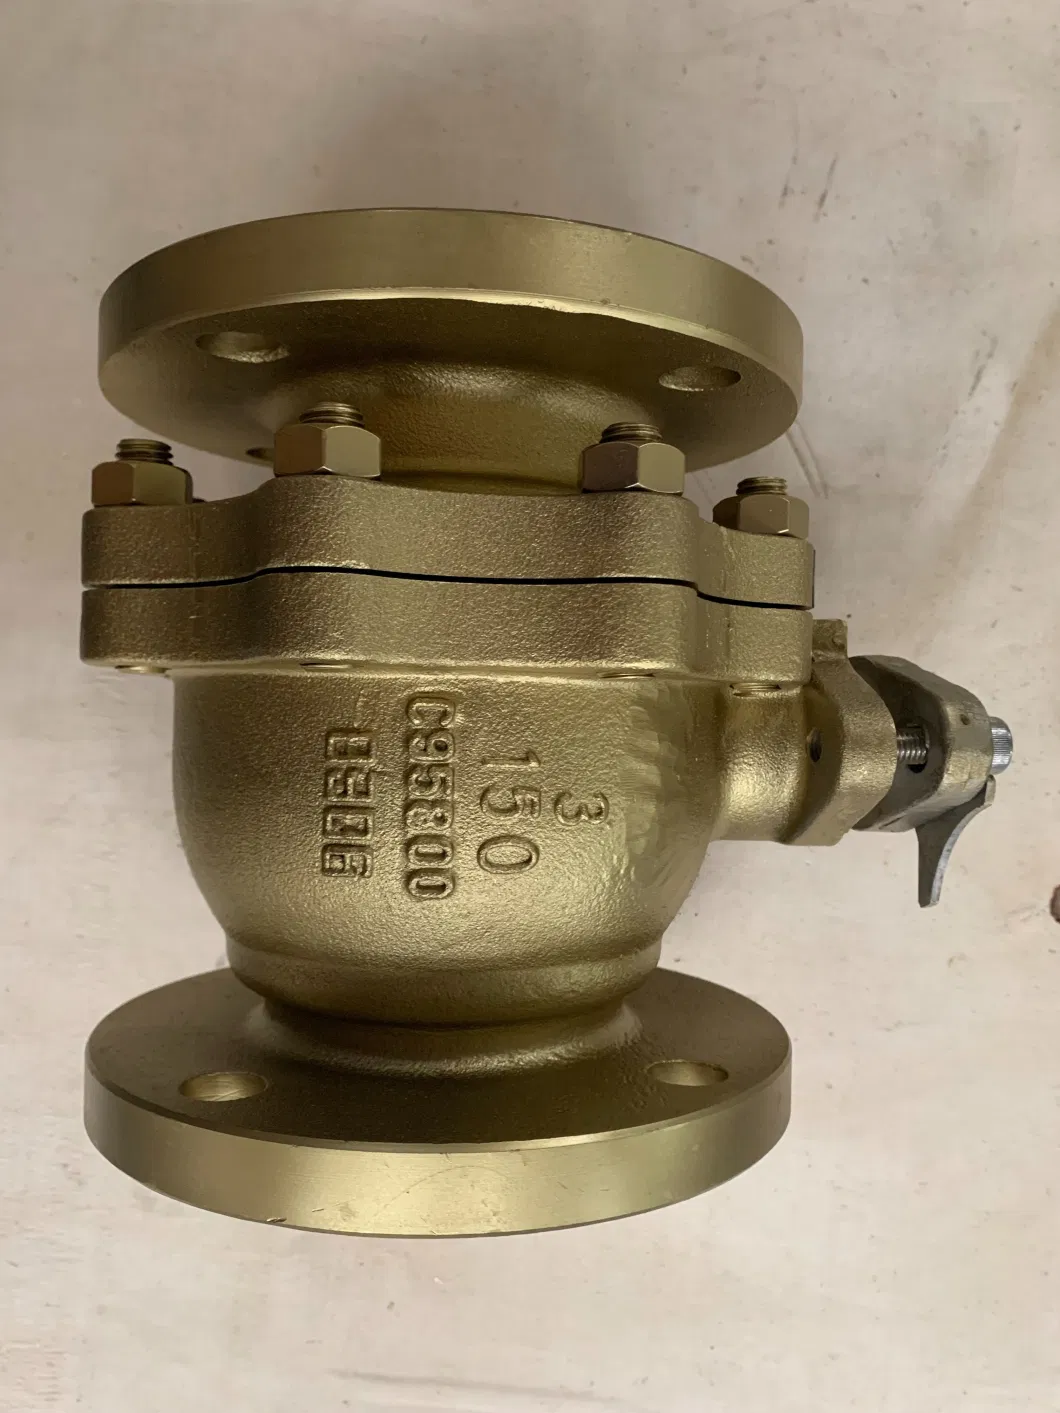 150# ASME B16.5 RF Valve API 6D Anti-Static B148 C95800 Bronze A216 Wcb Cast Carbon CF8 CF8m Stainless Steel Flange End Trunnion Mounted Floating Ball Valve